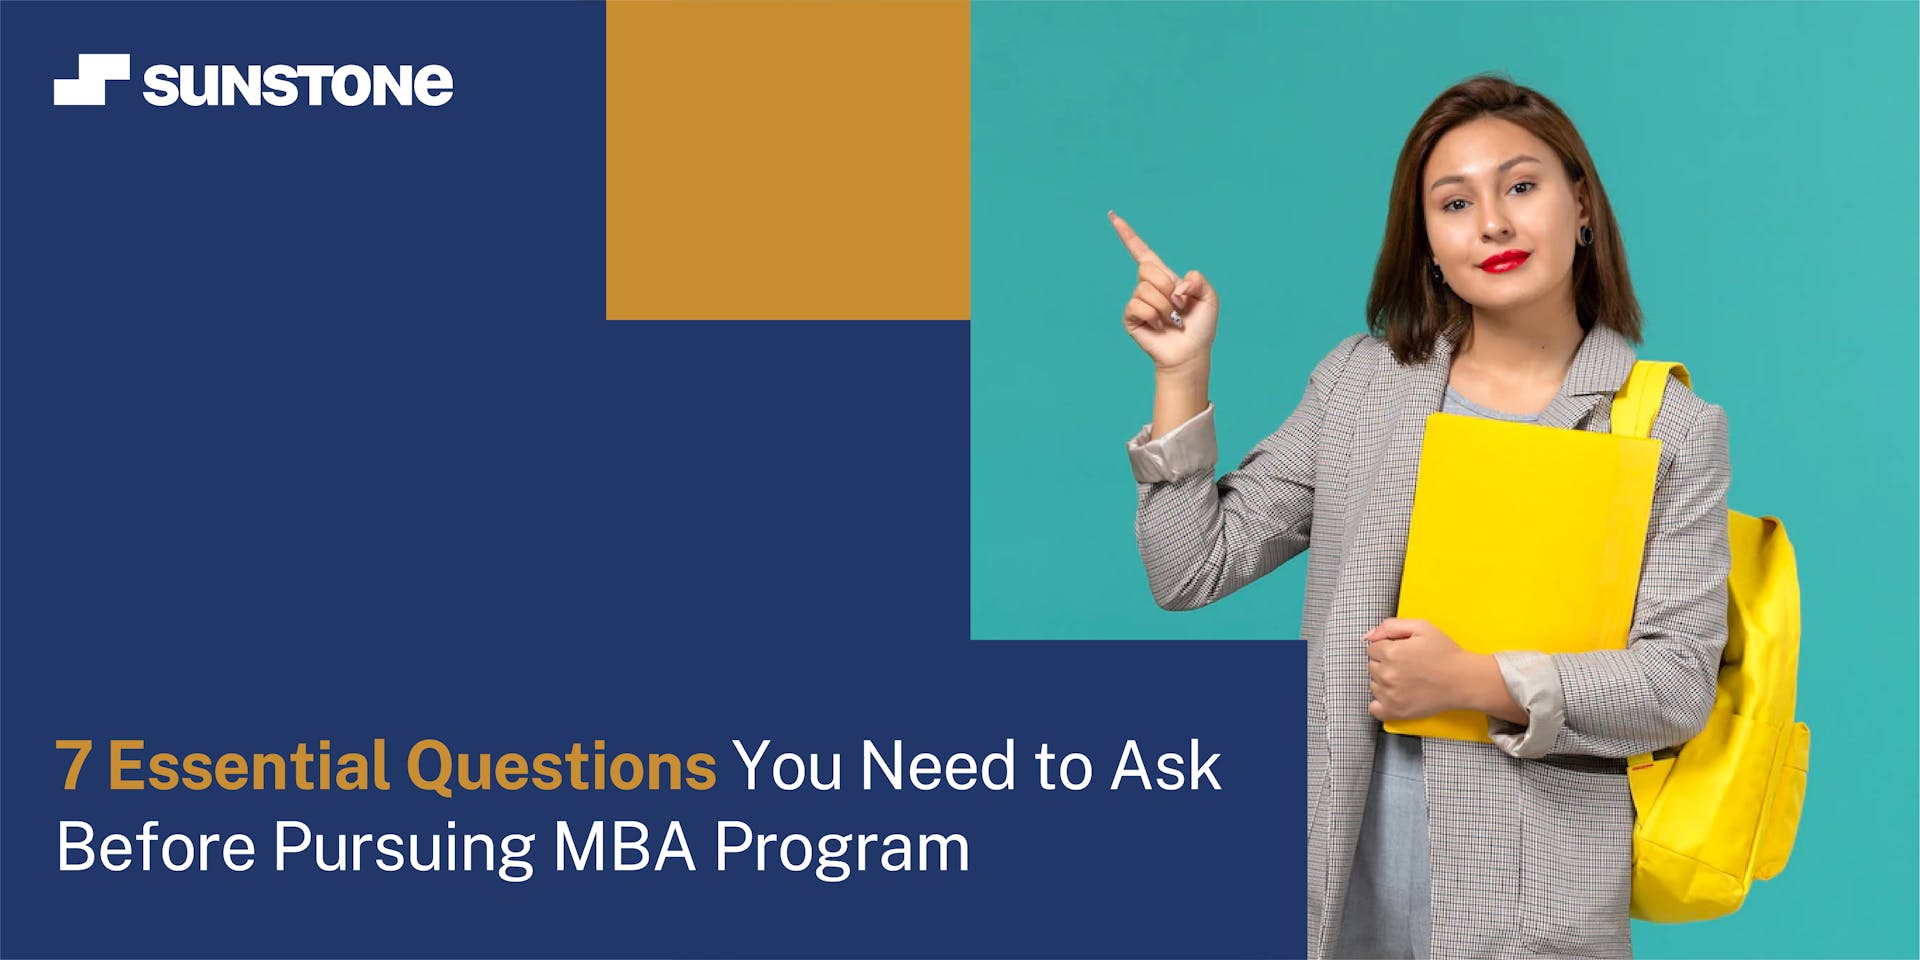 7 Essential Questions You Need to Ask Before Pursuing MBA Program